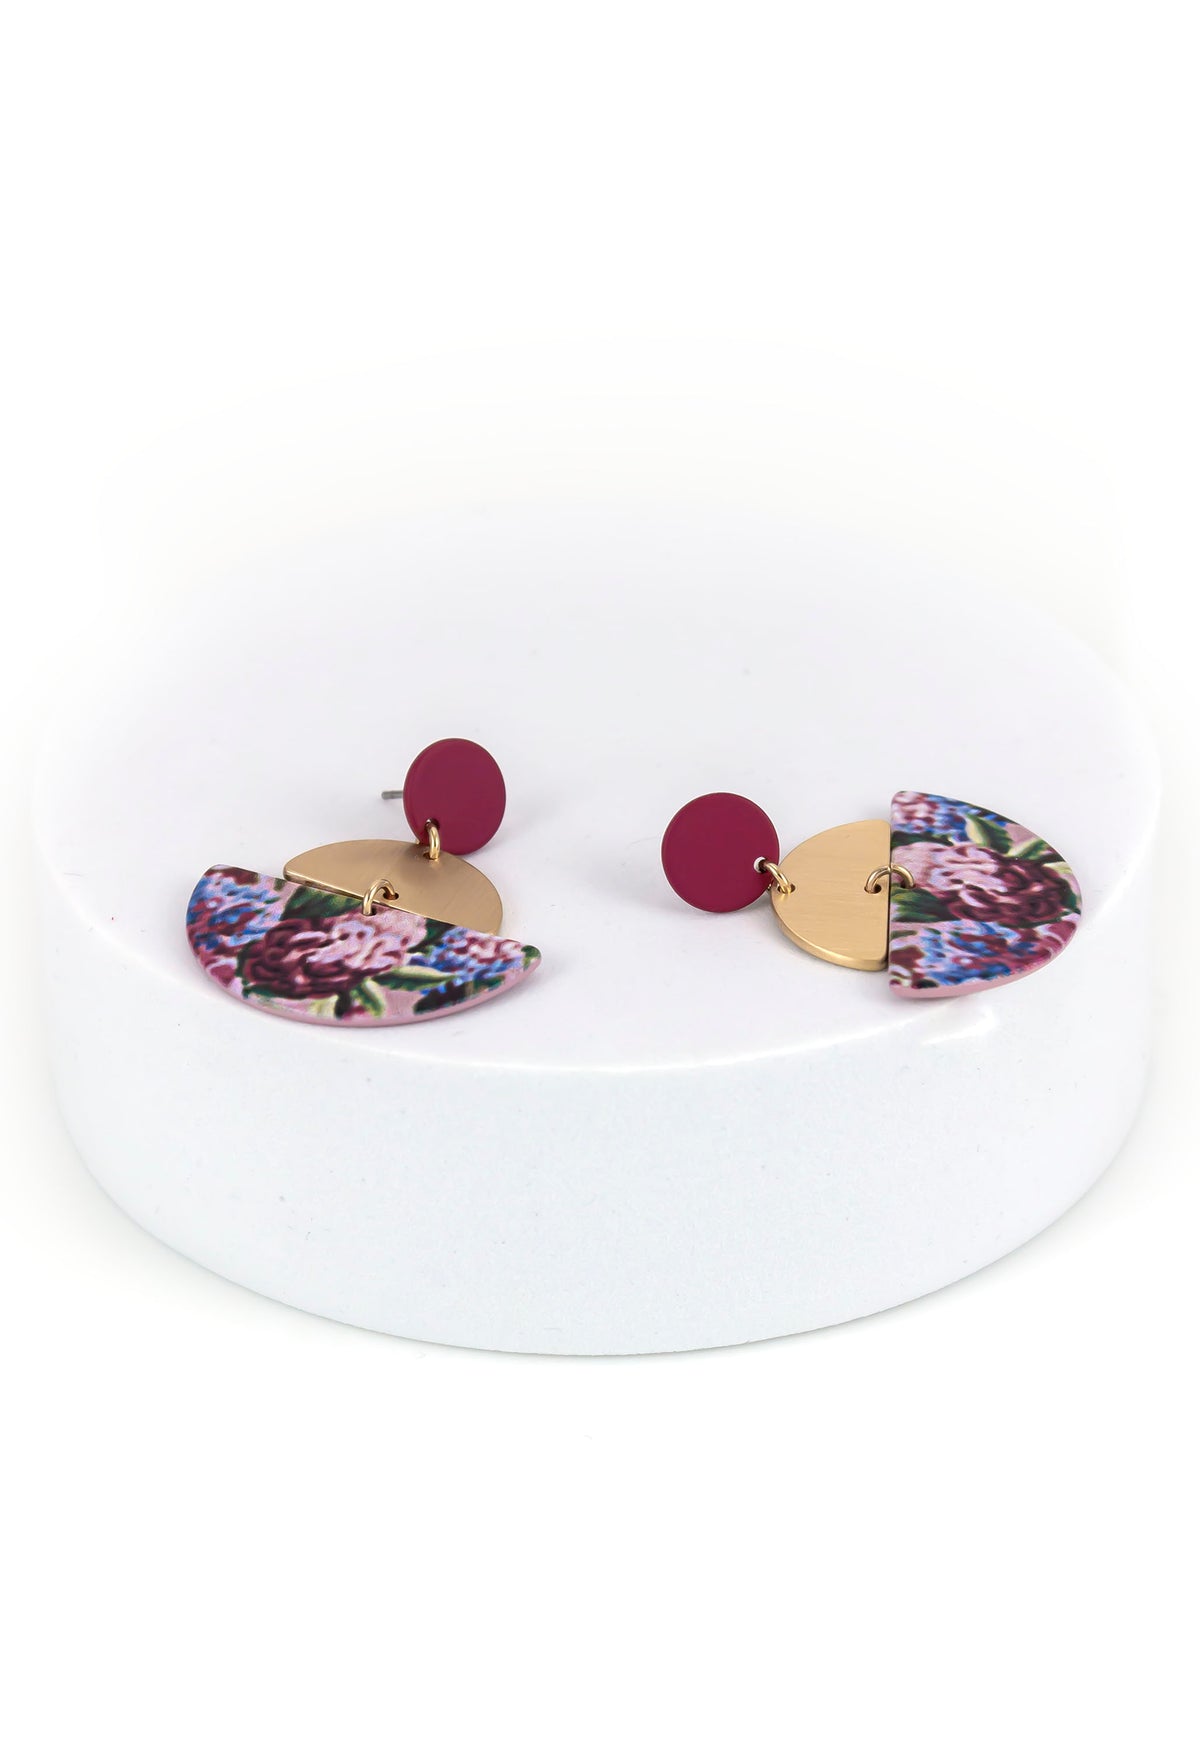 Laura Ashley Berry Multi Post Double Crescent Drop Earrings